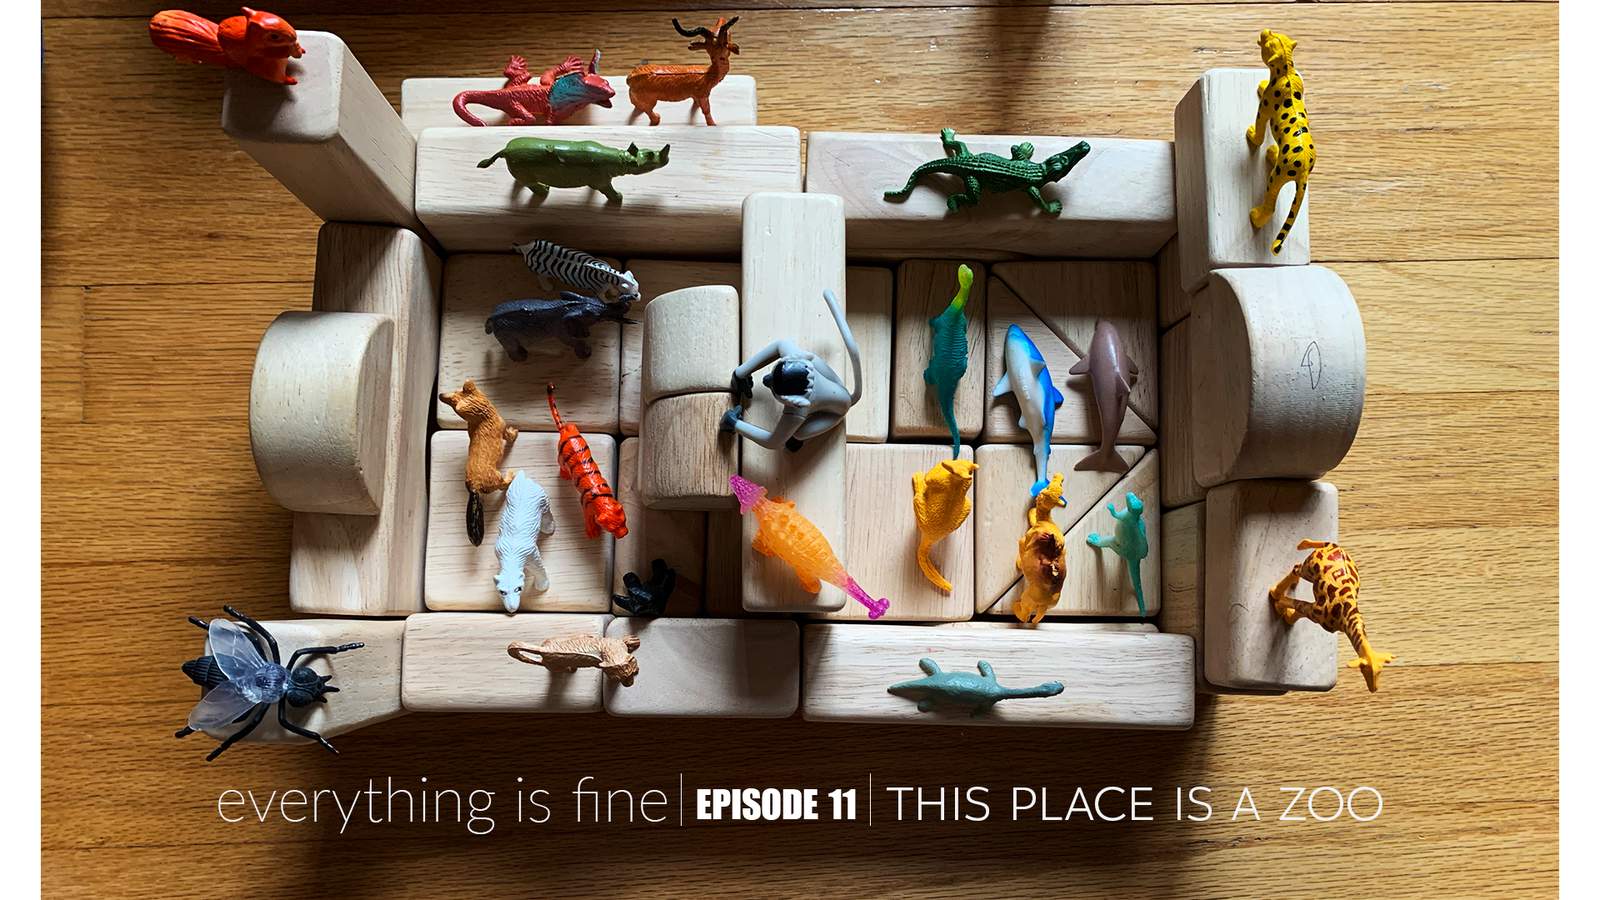 ‘Everything is Fine’ podcast: This place is a zoo